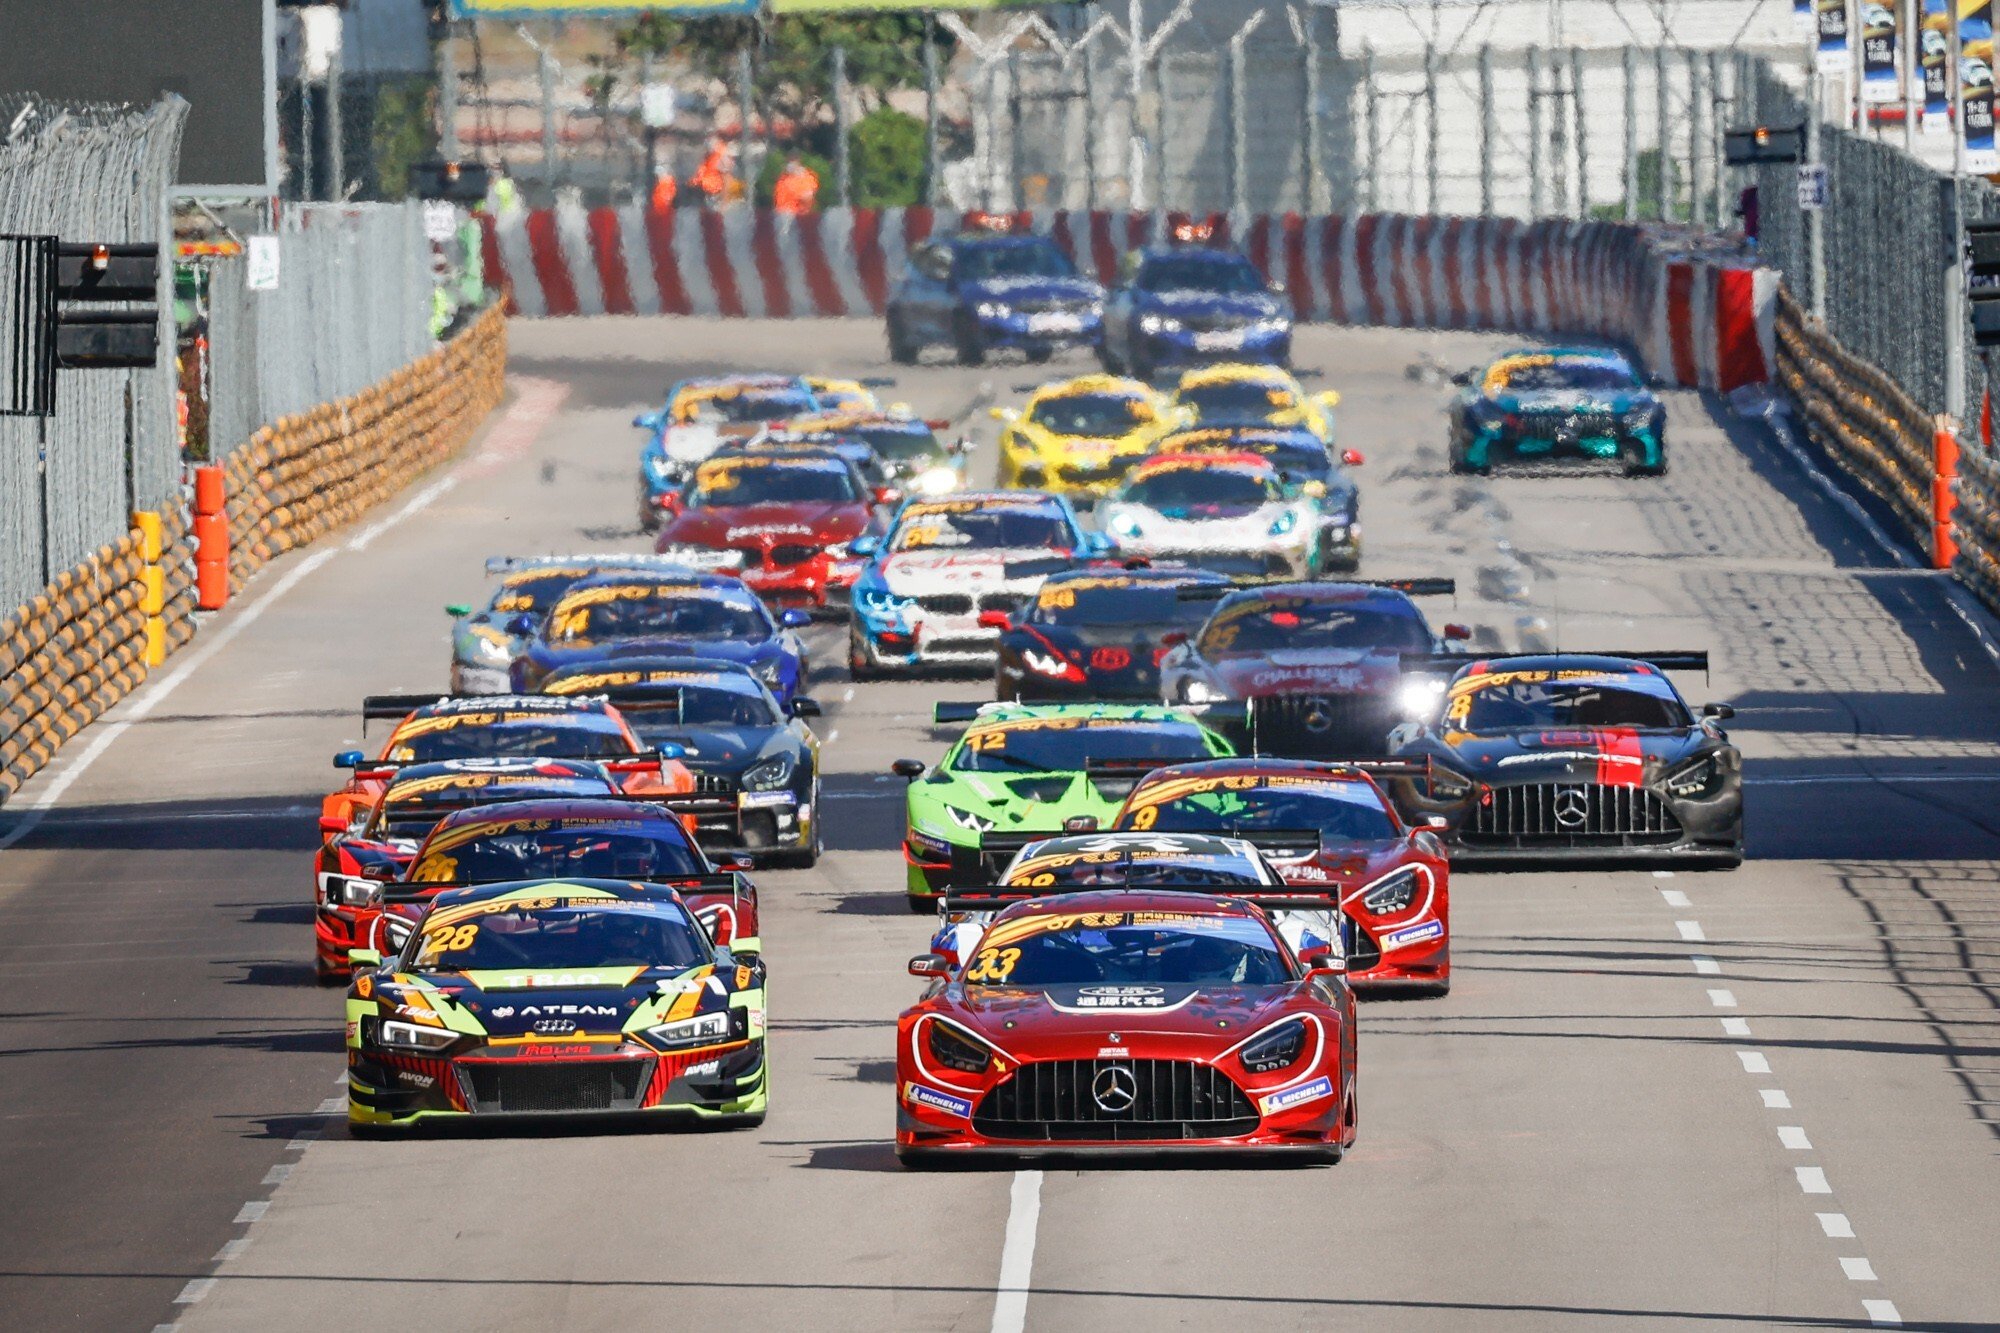 The tight Guia street circuit will feature mostly drivers from the mainland and Hong Kong this year. Photo: Macau Grand Prix